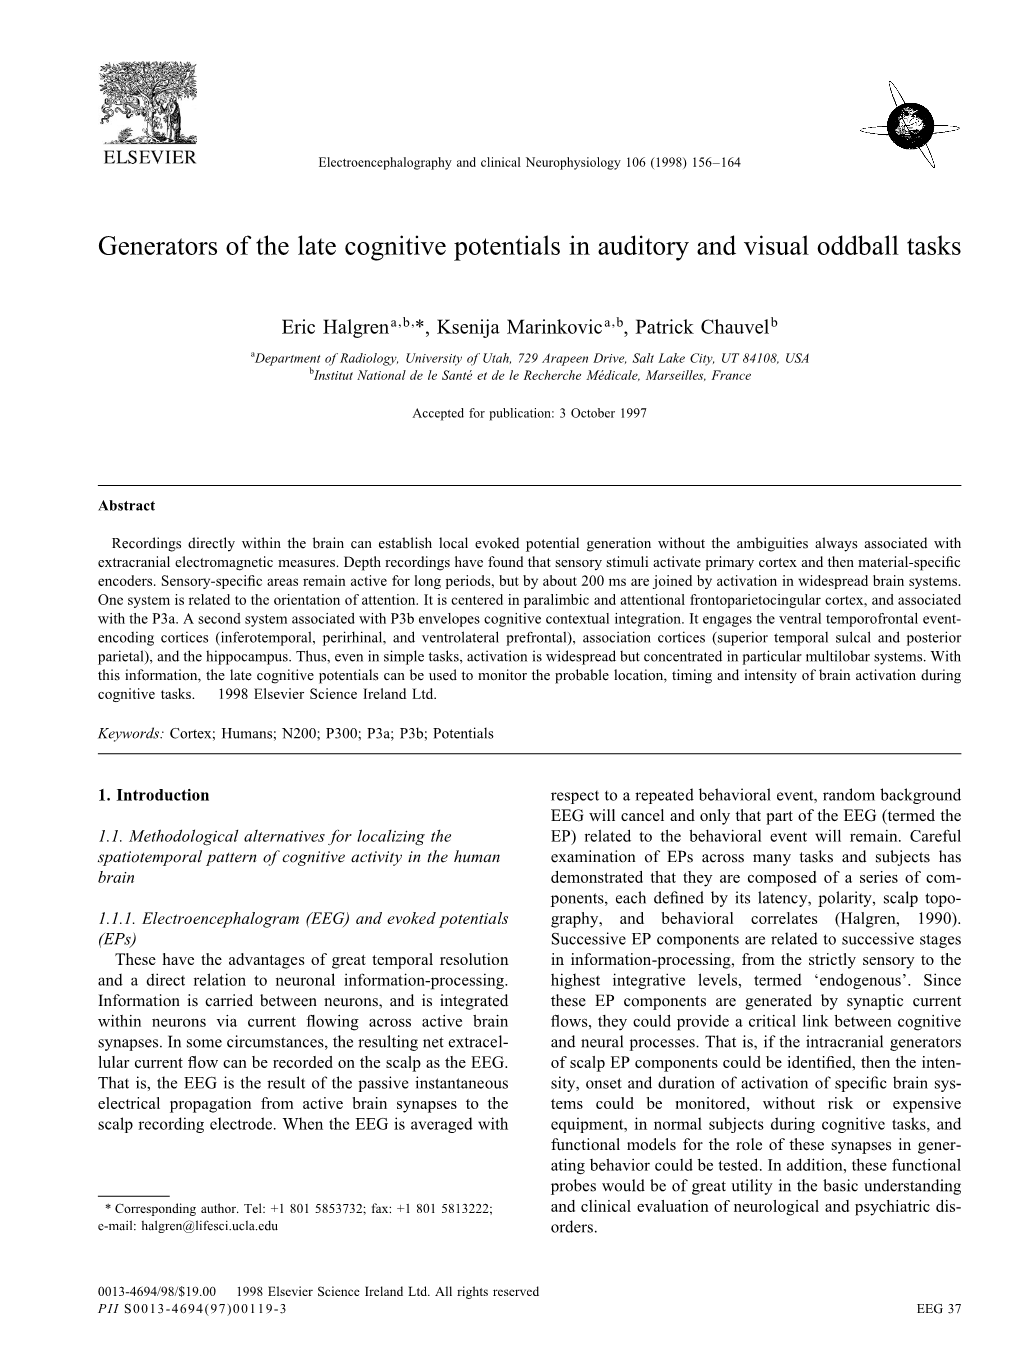 Generators of the Late Cognitive Potentials in Auditory and Visual Oddball Tasks